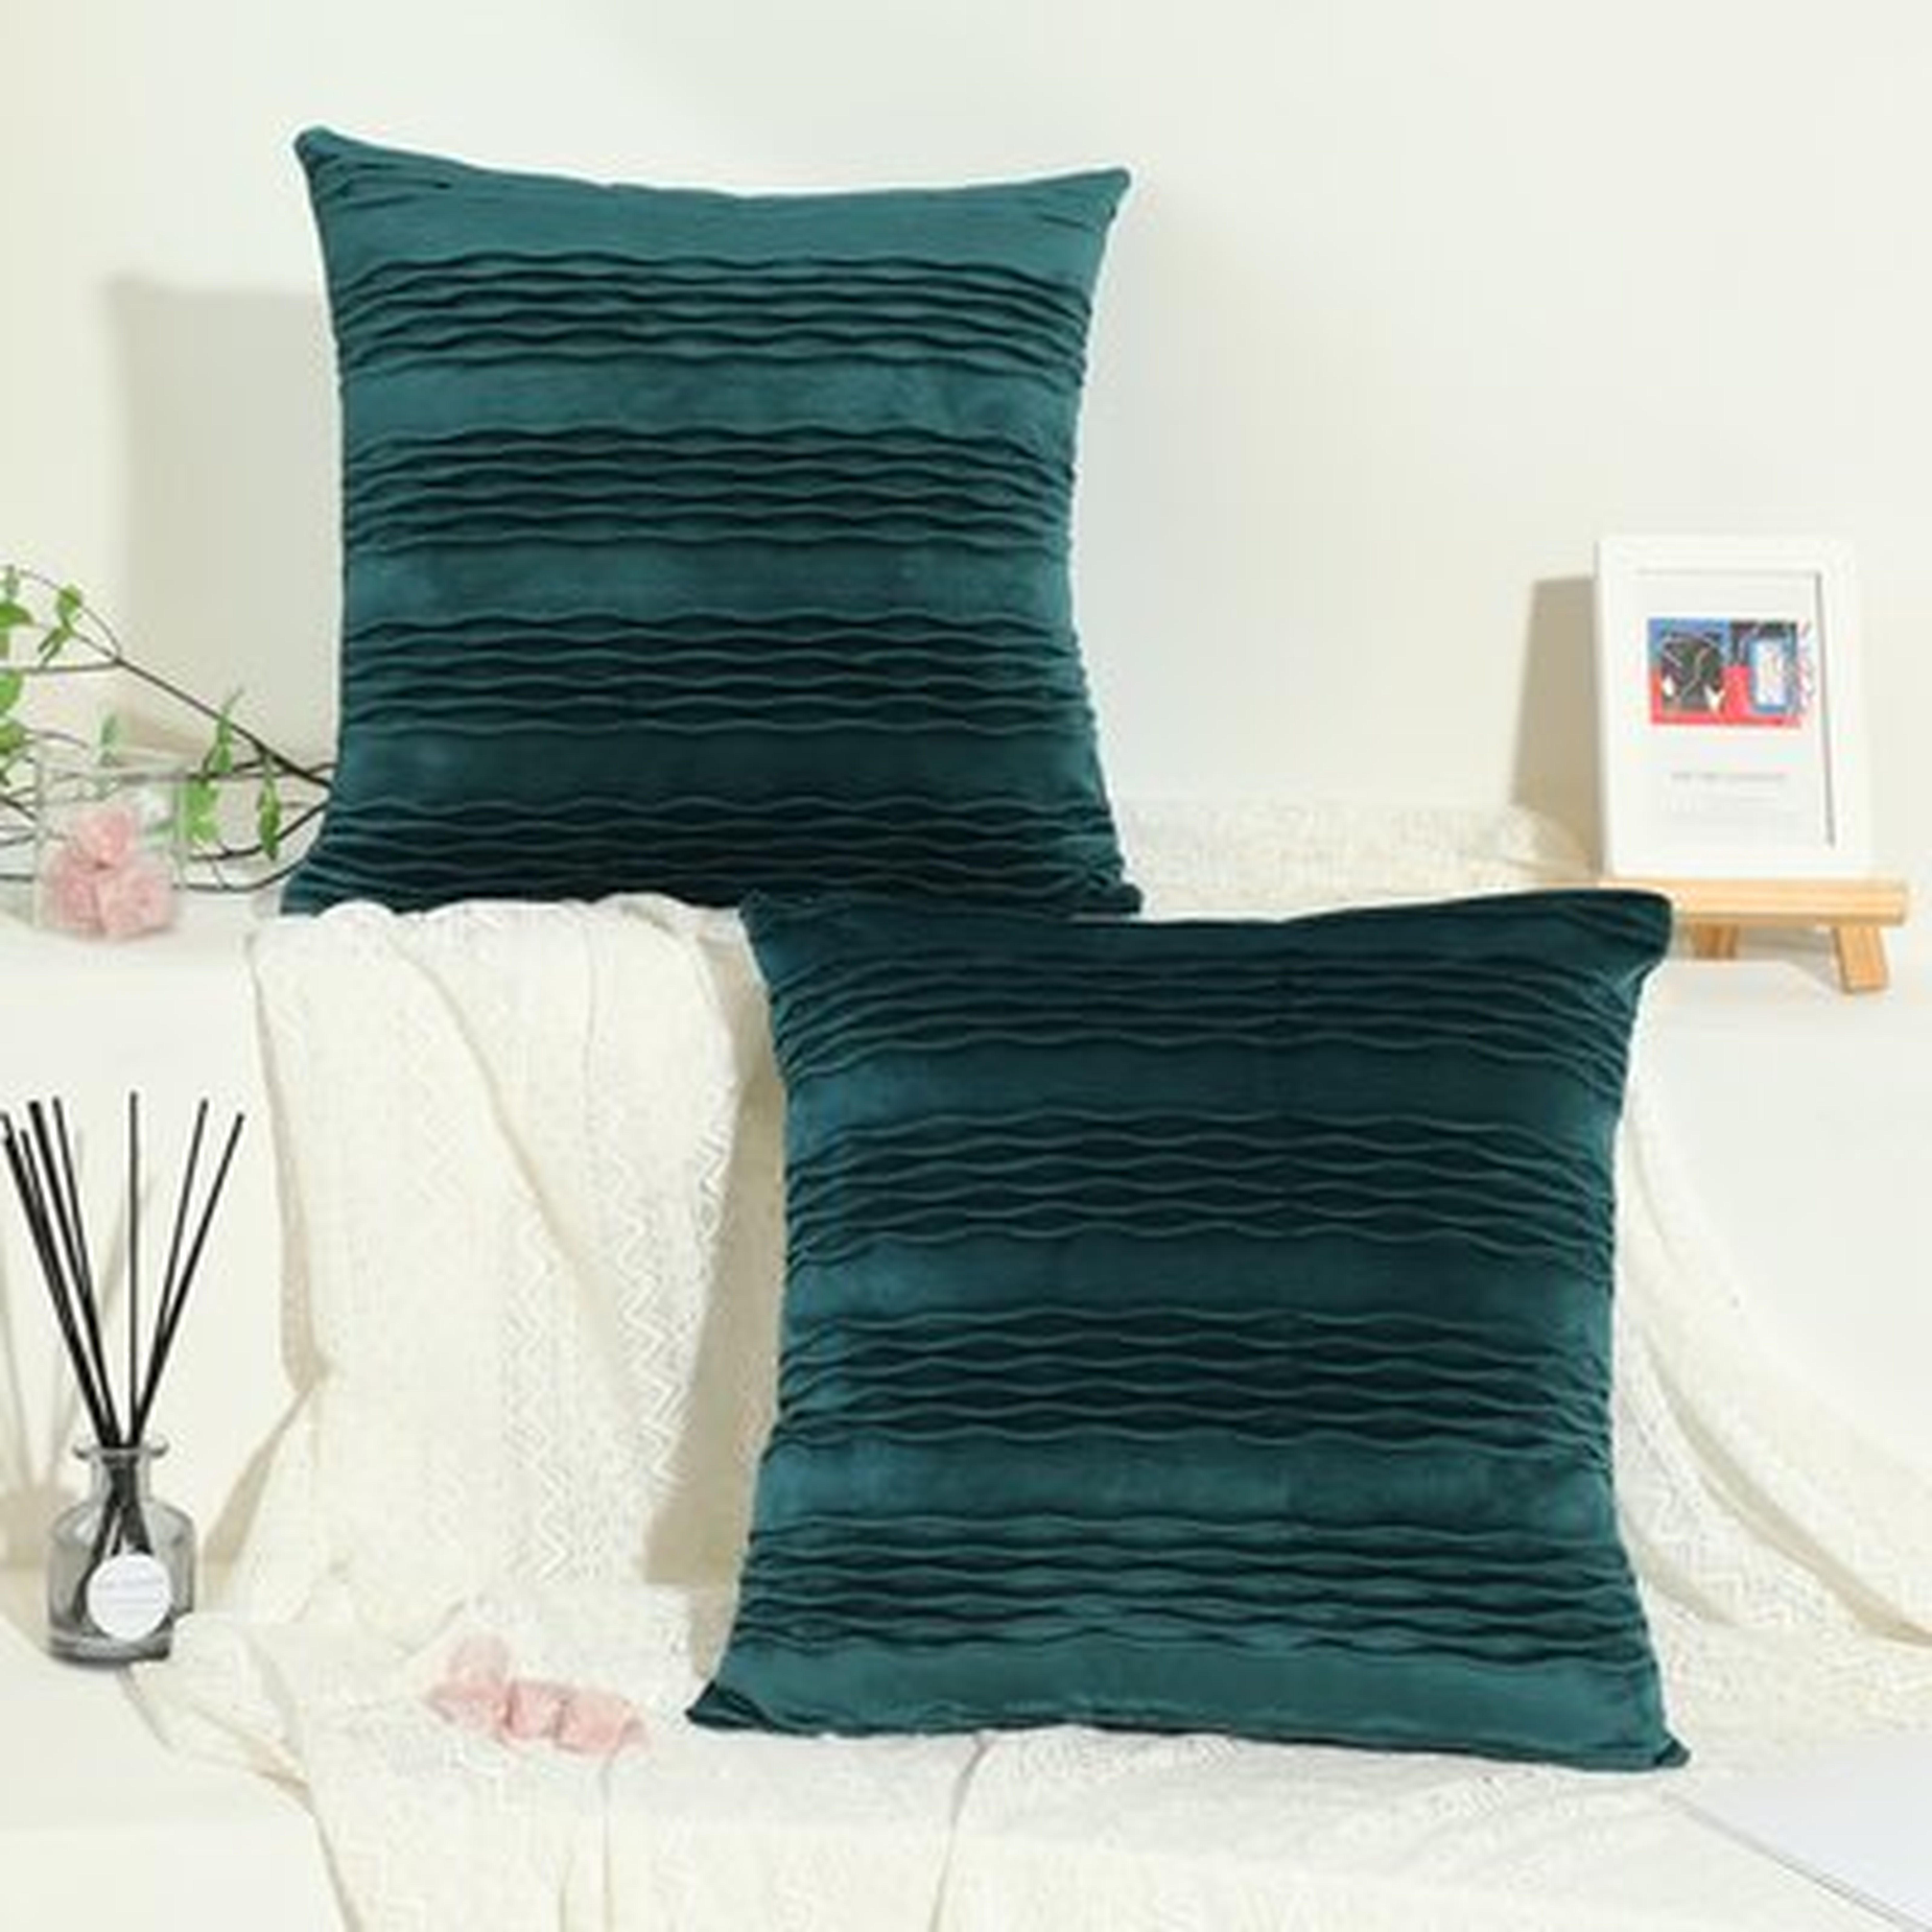 Pannell Square Pillow Cover - Wayfair